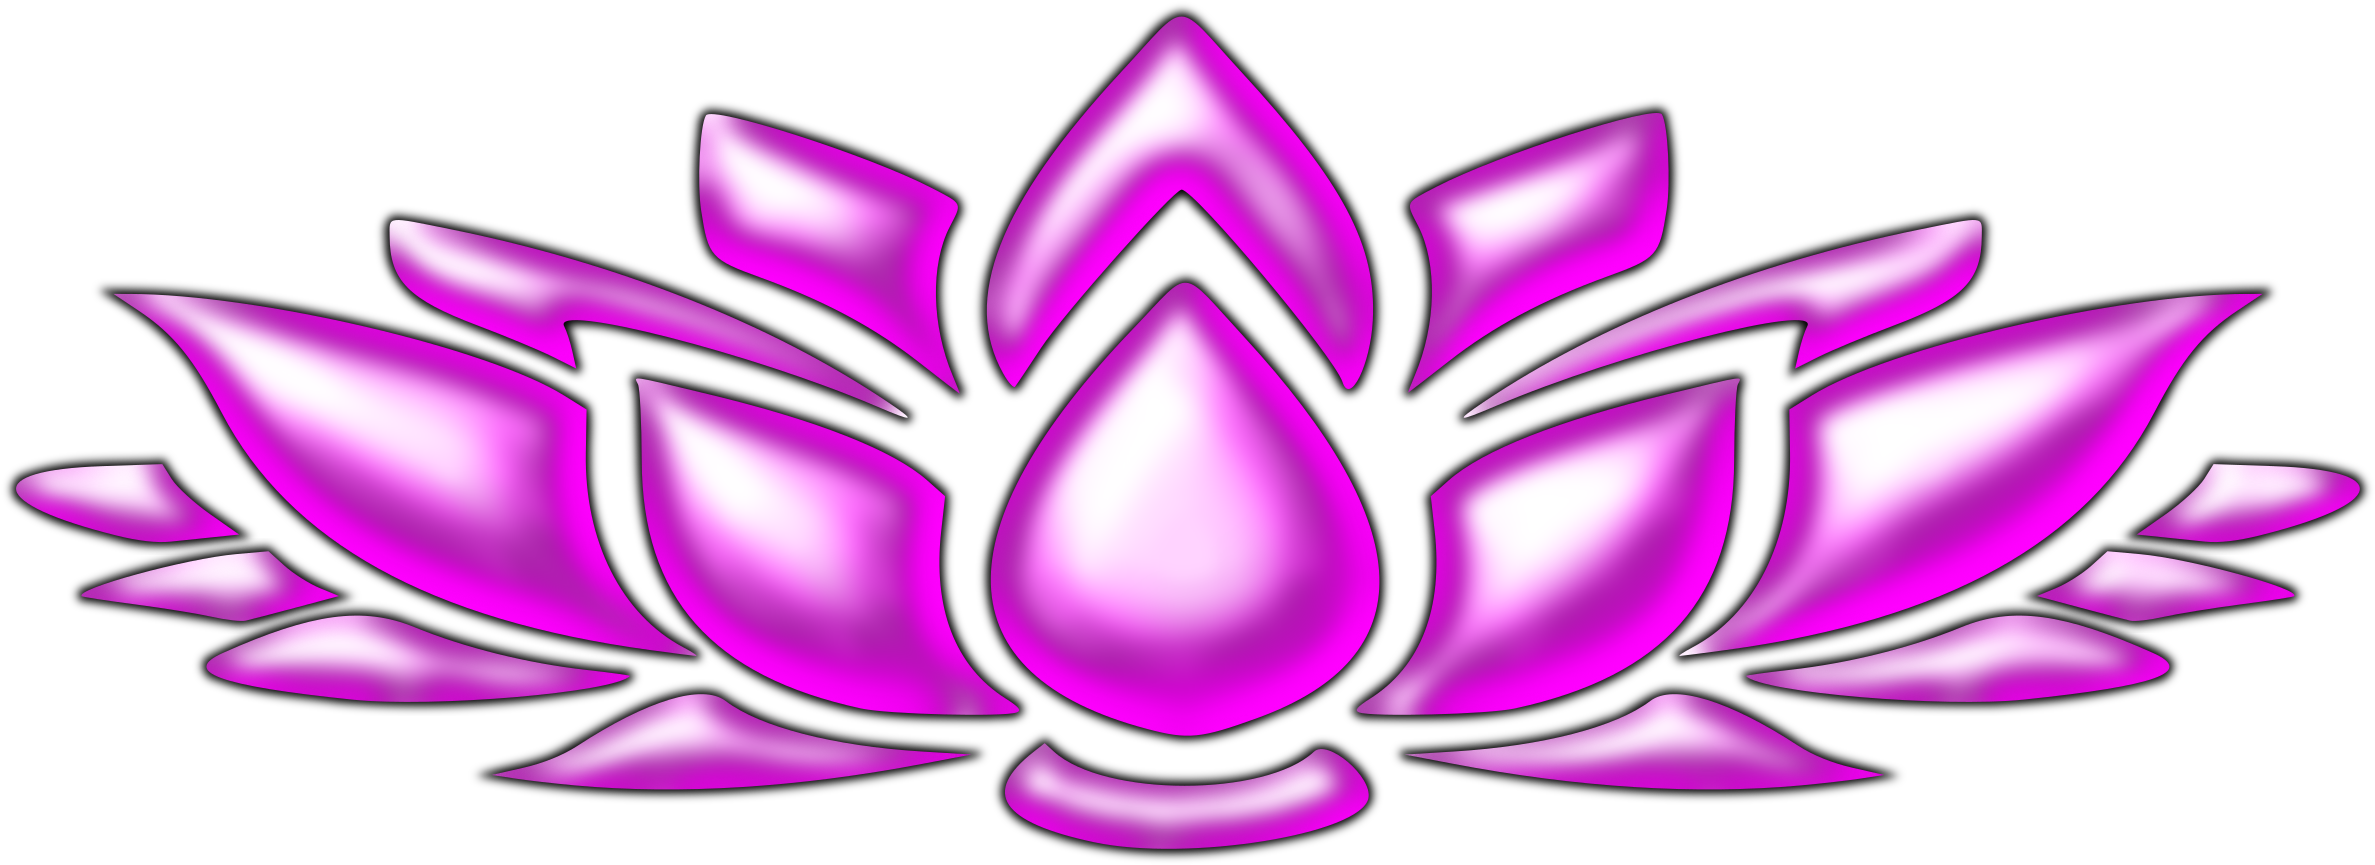 Lotus Flower 4 Icons Png - Portable Network Graphics (2400x891), Png Download